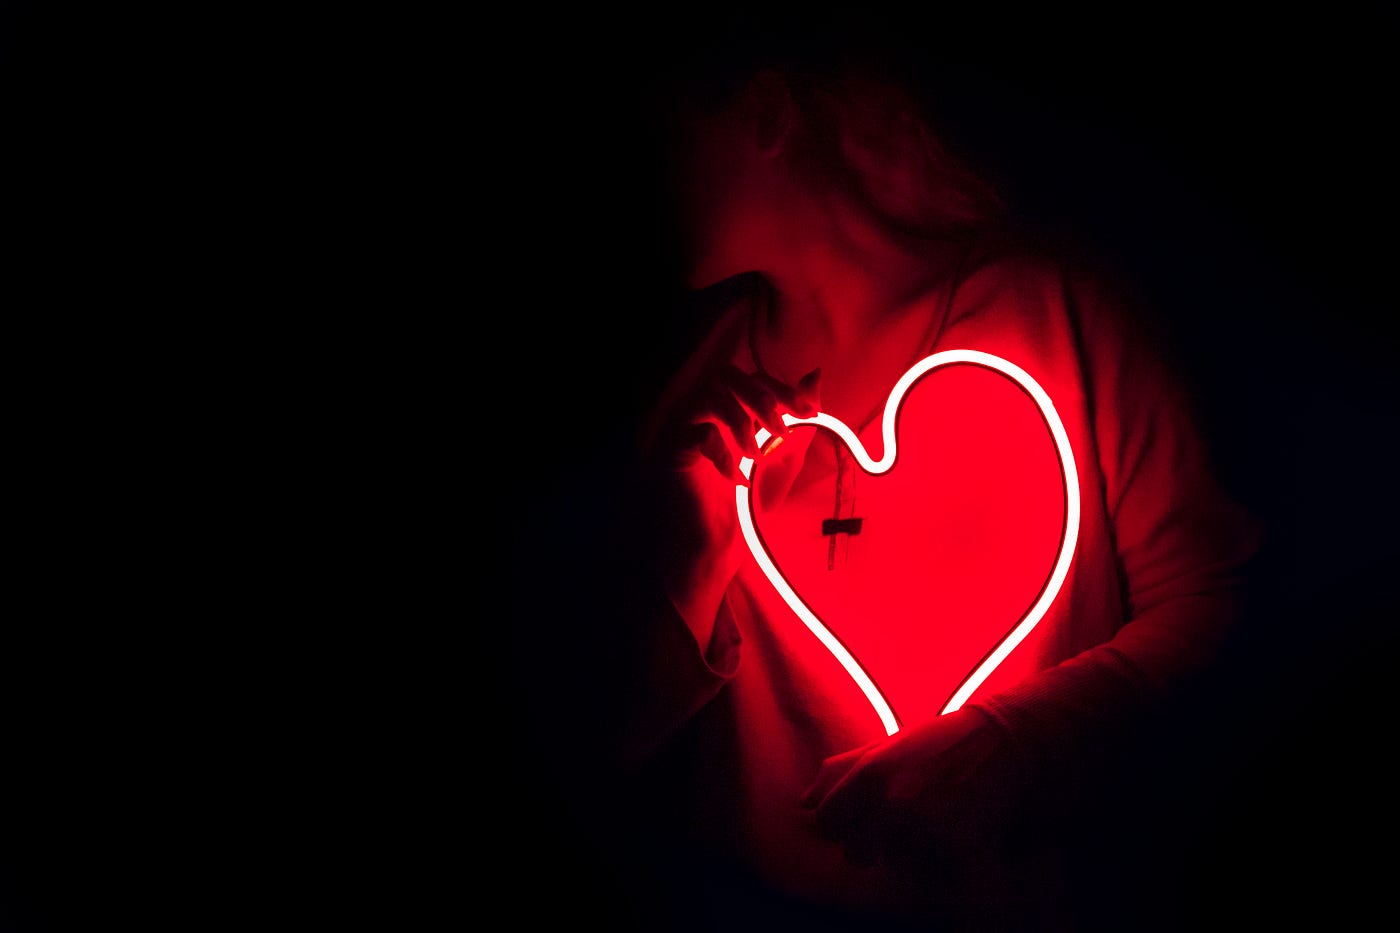 A woman holds a heart-shaped neon light against her torso. The light is white, while the interior is reddish. Dark setting; we can barely see the woman holding the heart. Cardiovascular disease is associated with worse COVID infection outcomes.